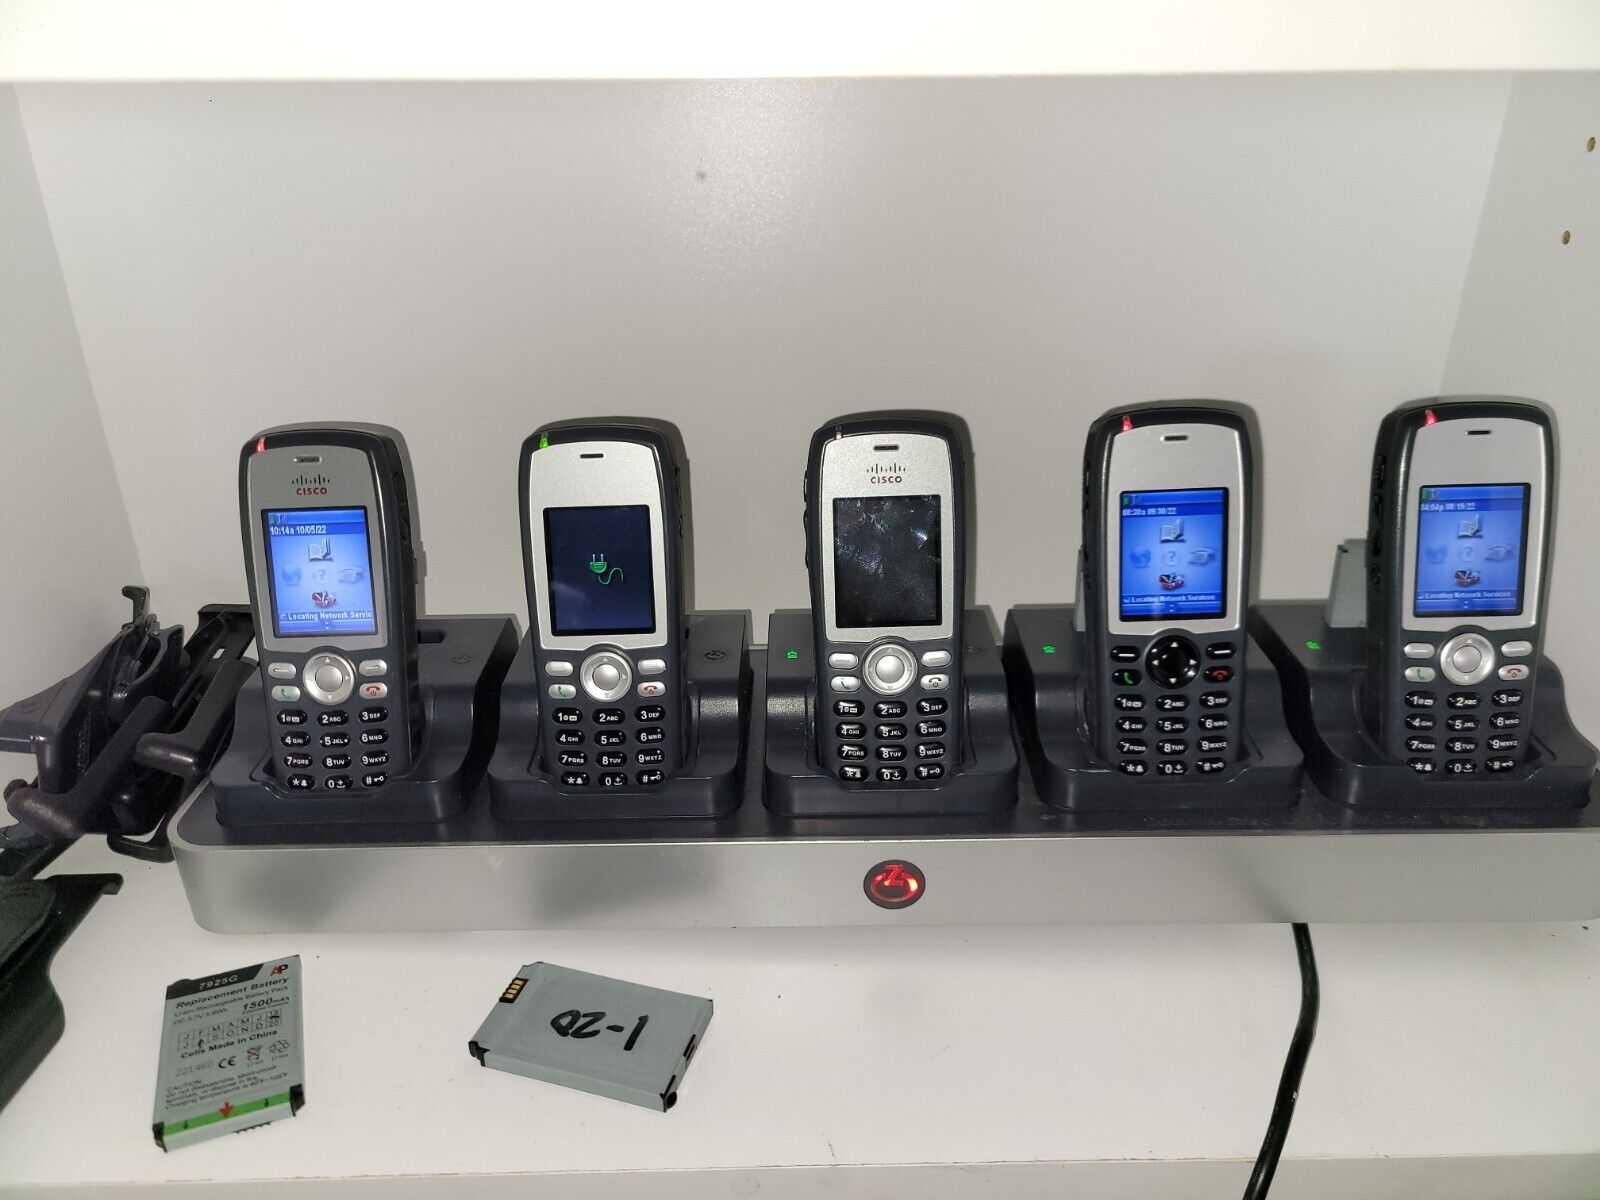 Lot of 5 Cisco 7925 Wireless Phones CP-7925G W/ Z-Cover Base TESTED